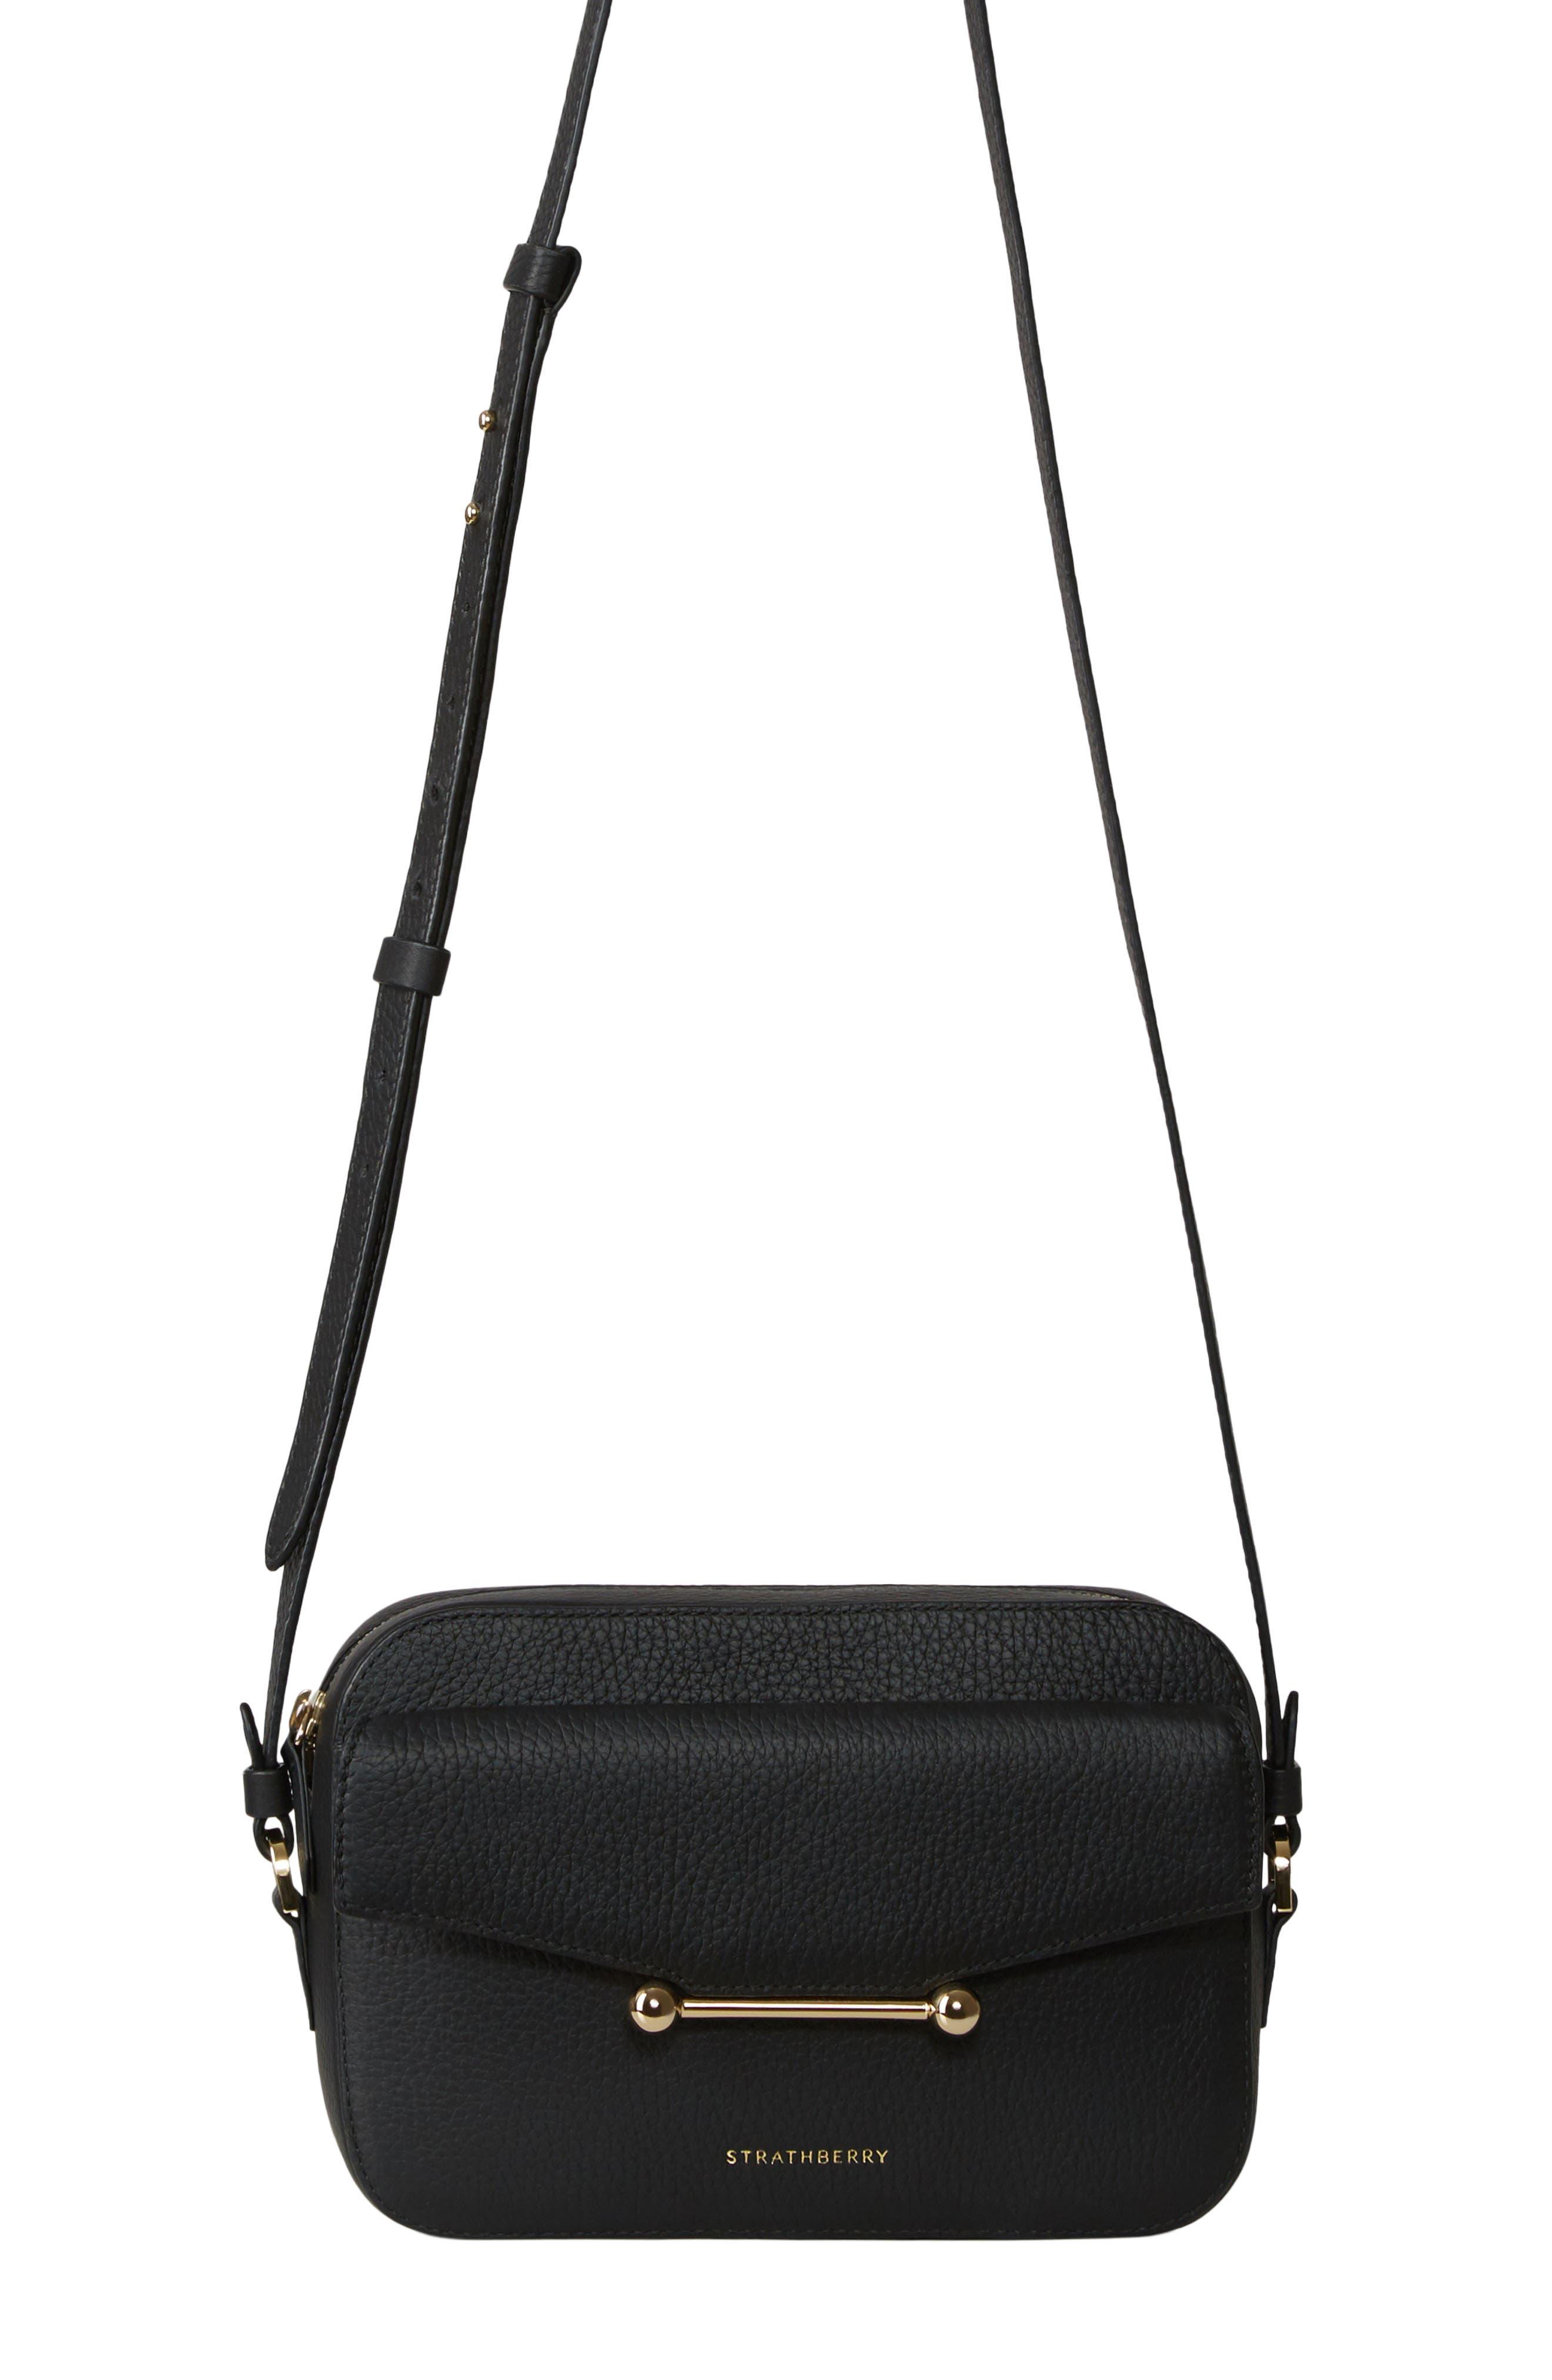 Strathberry Mosaic Leather Crossbody Camera Bag in Black